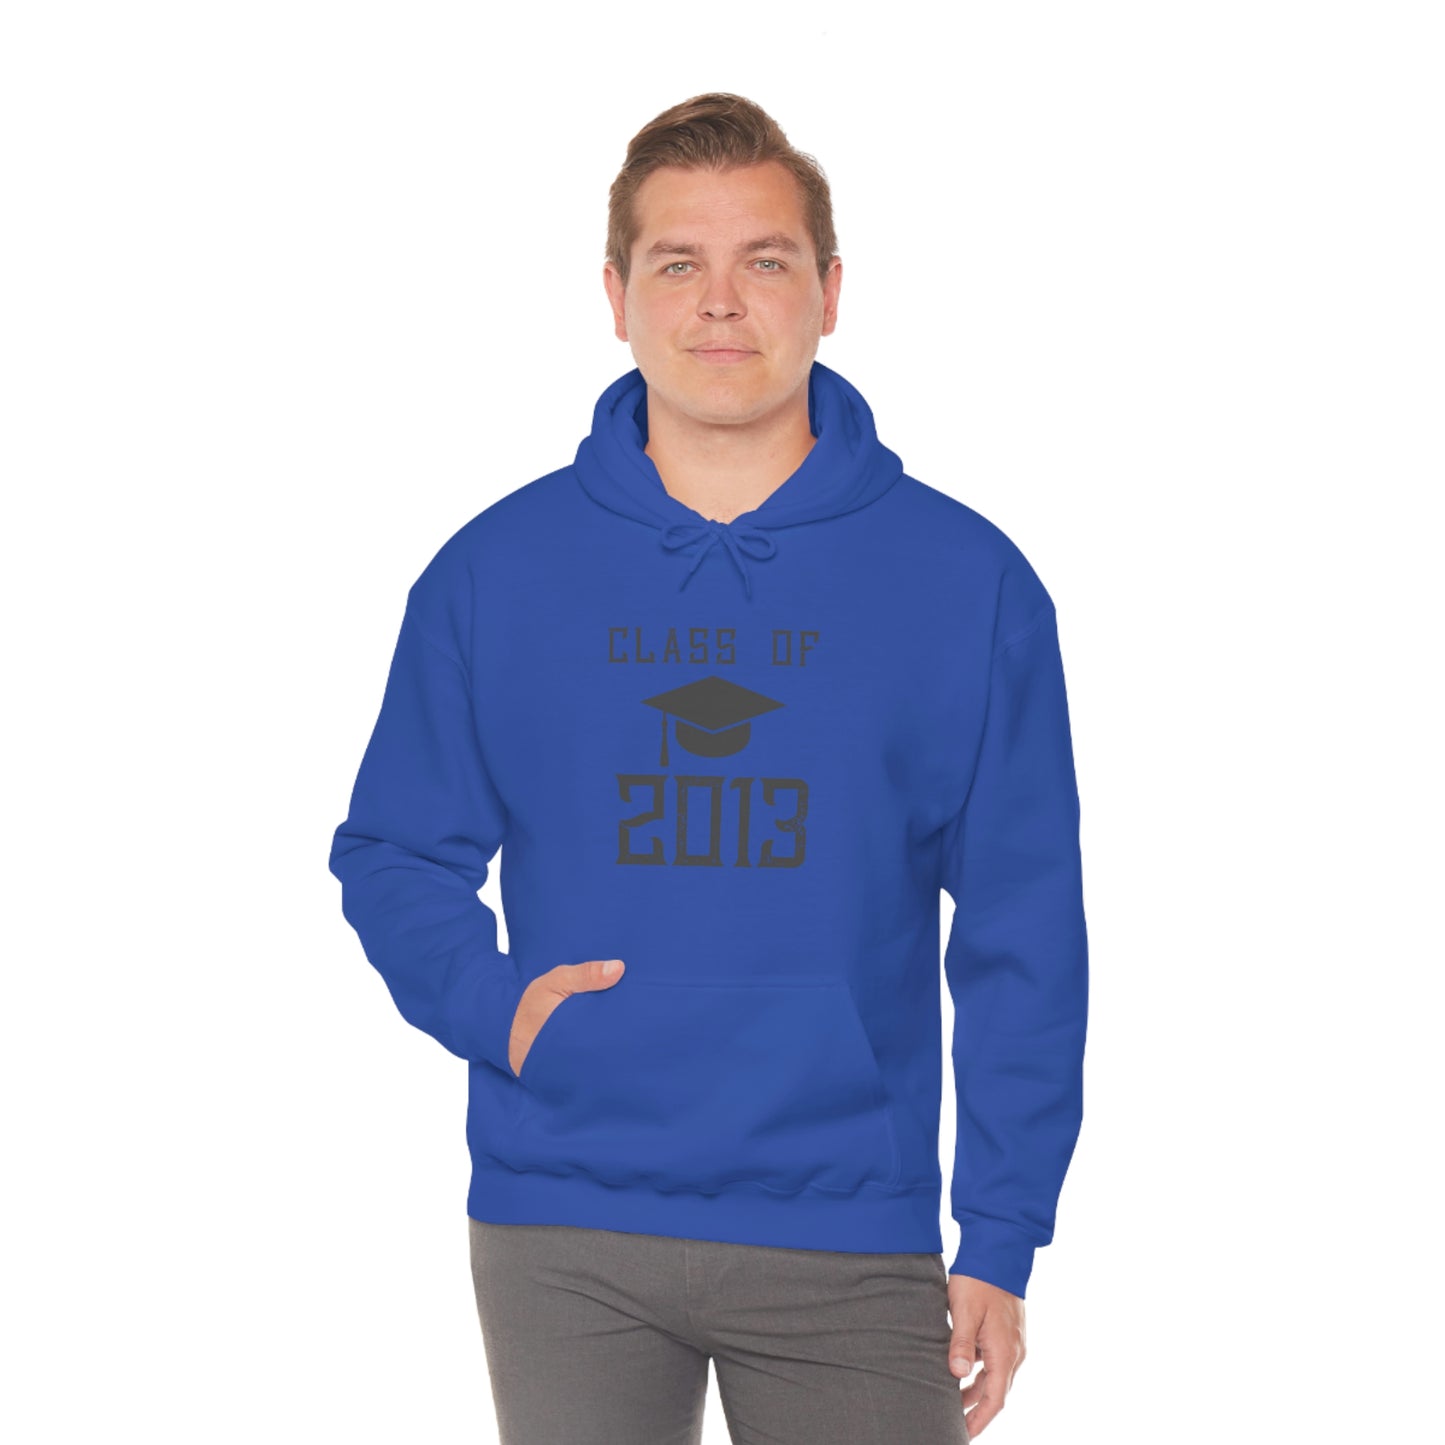 "Class Of 2013" Hoodie - Weave Got Gifts - Unique Gifts You Won’t Find Anywhere Else!